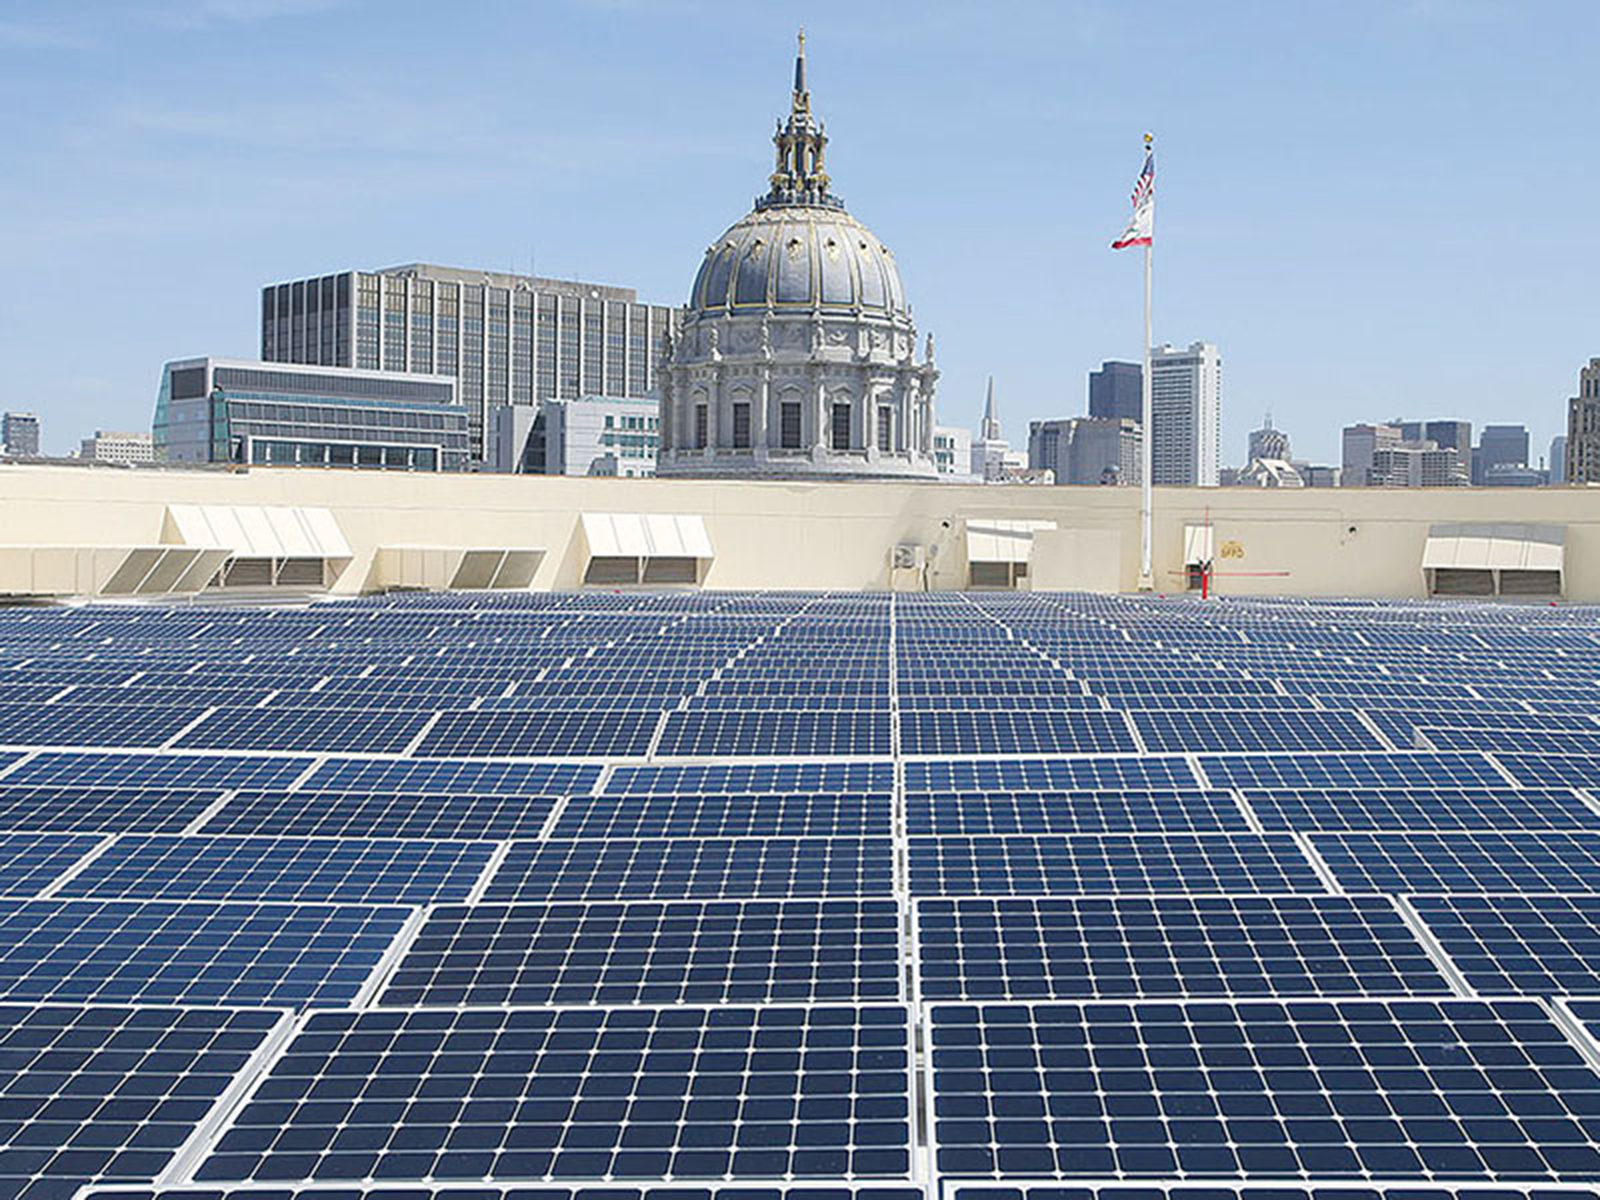 solar energy, rooftop solar, California clean energy policies, National Renewable Energy Laboratory, carbon emissions, San Francisco solar policy